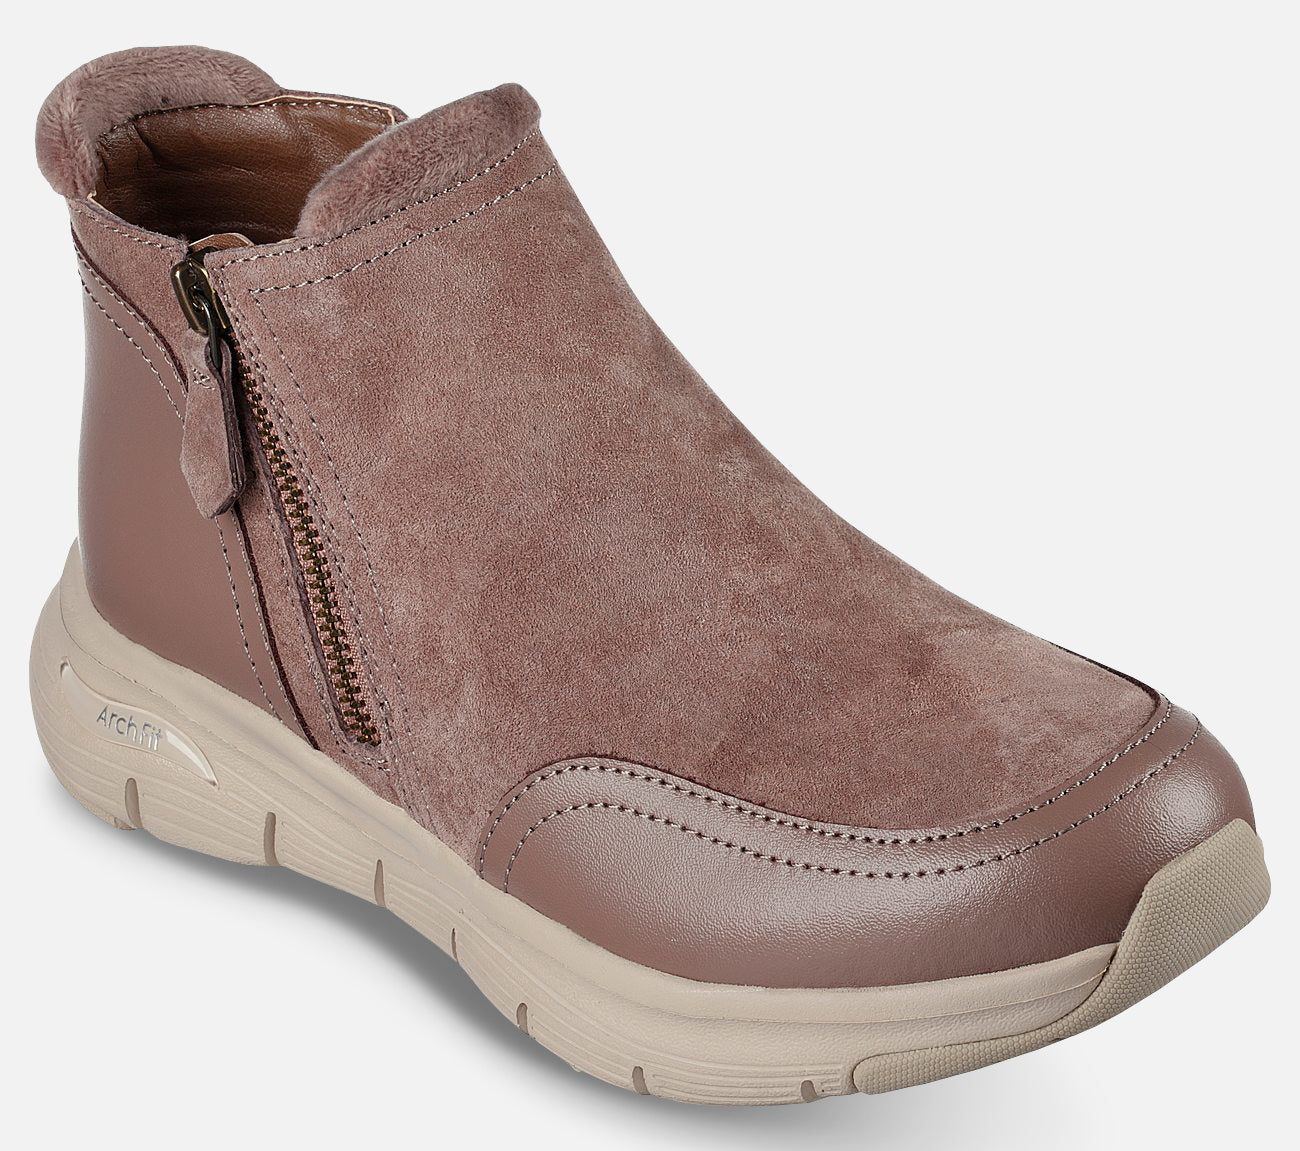 Arch Fit Smooth - Modest - Water Repellent Boot Skechers